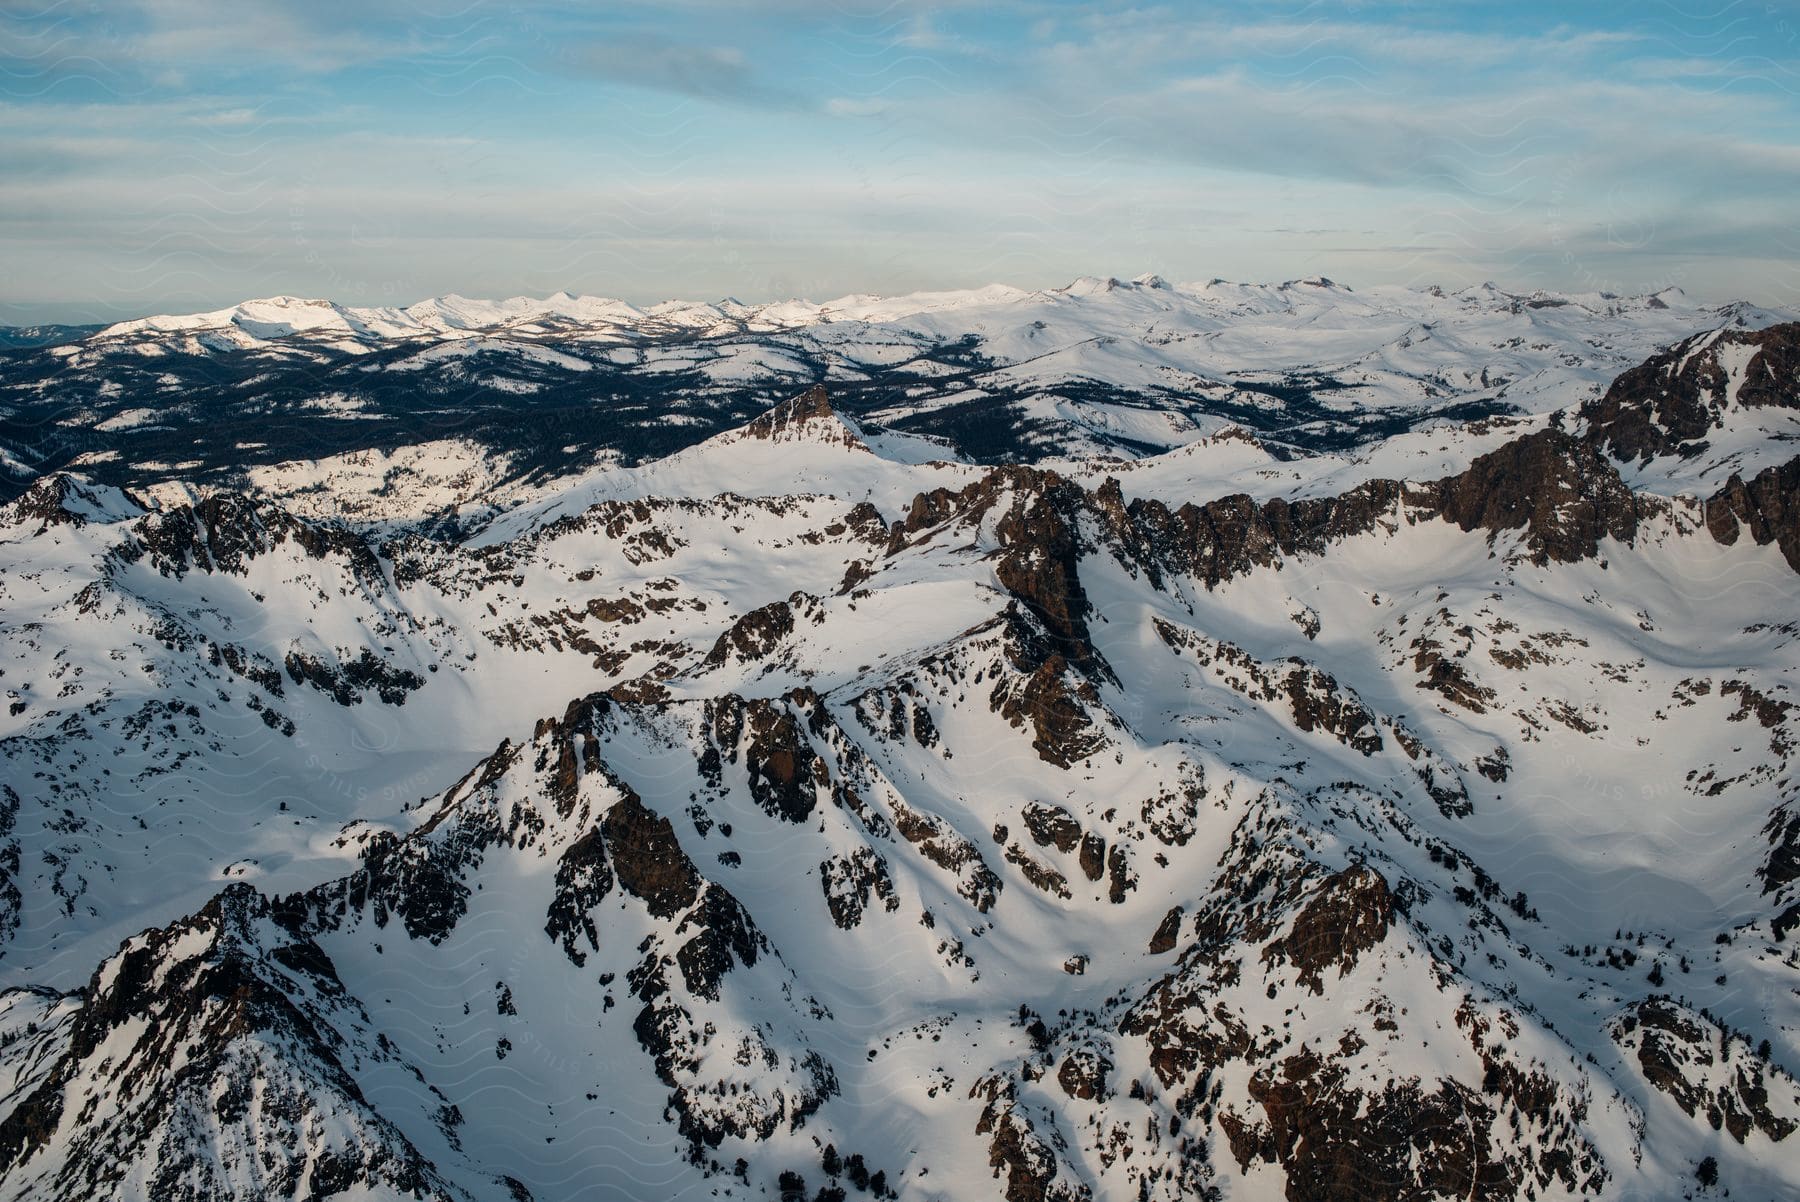 Panorama of mountains and peaks covered in snow.